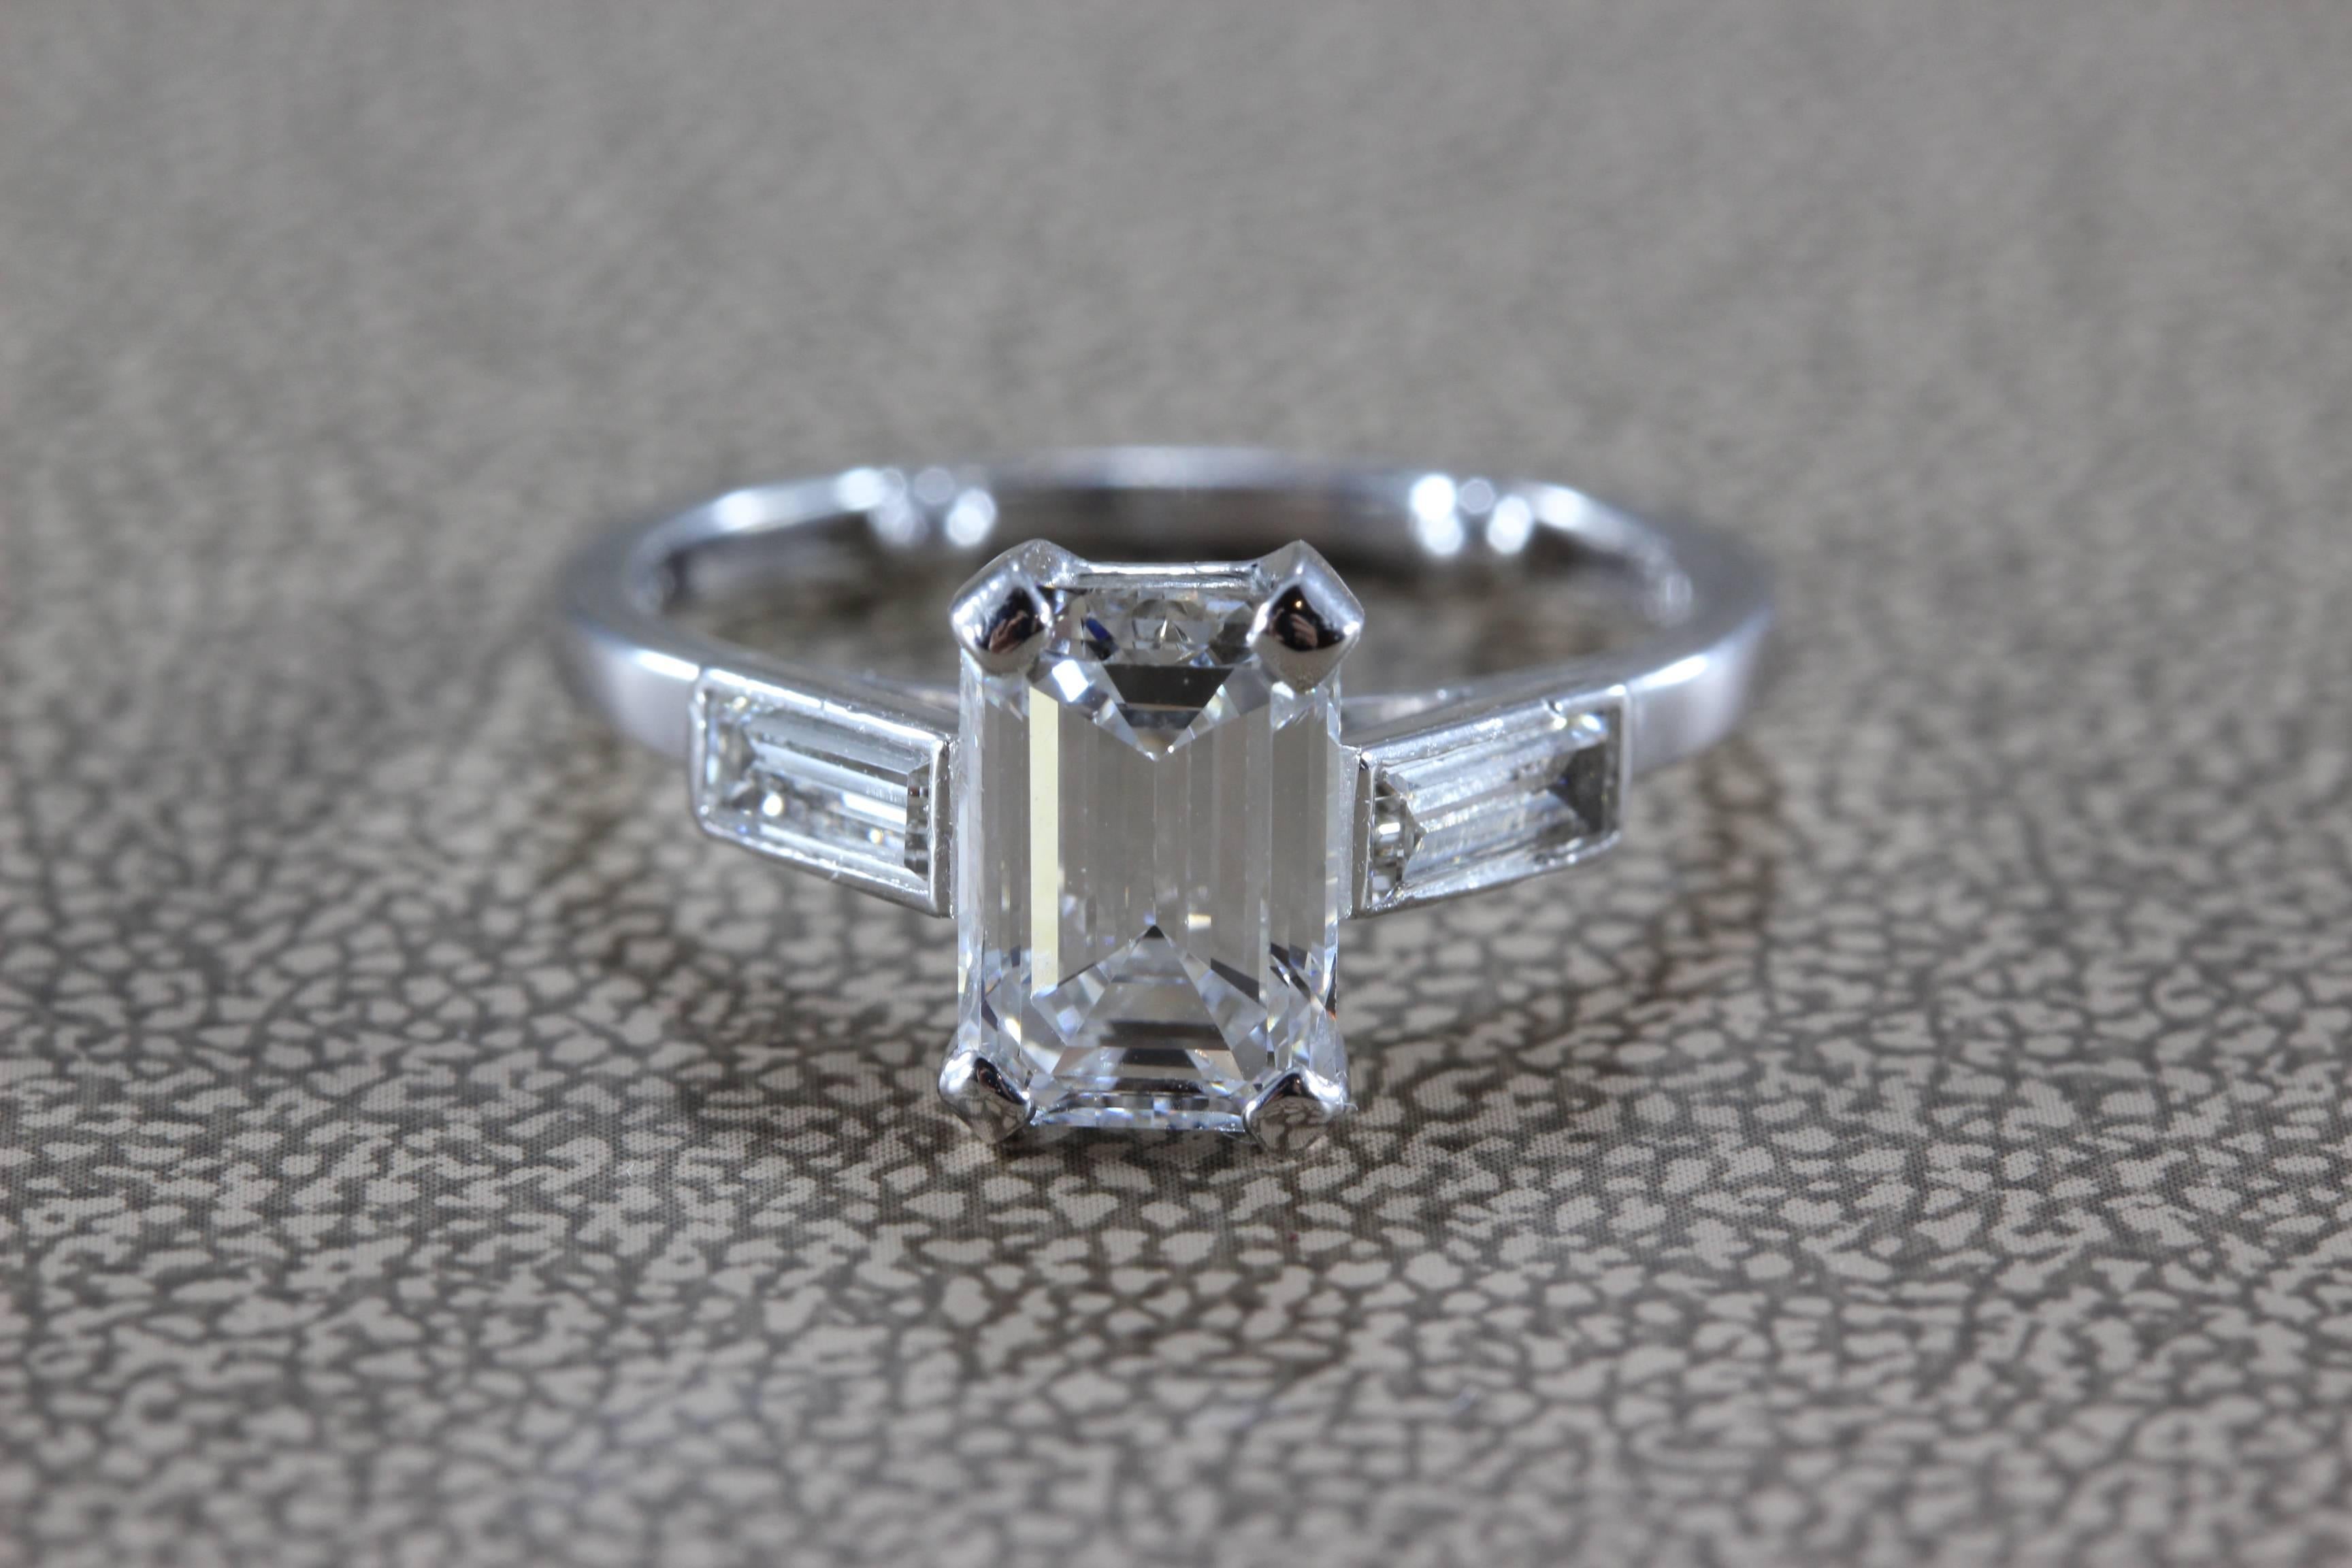 A classic diamond engagement ring by the King of Diamonds, Harry Winston. It mains a beautifully cut and shaped 1.38 carat E VS1 emerald cut diamond, top color and clarity.  Two baguette cut diamonds of equal quality are set on the shoulders of the